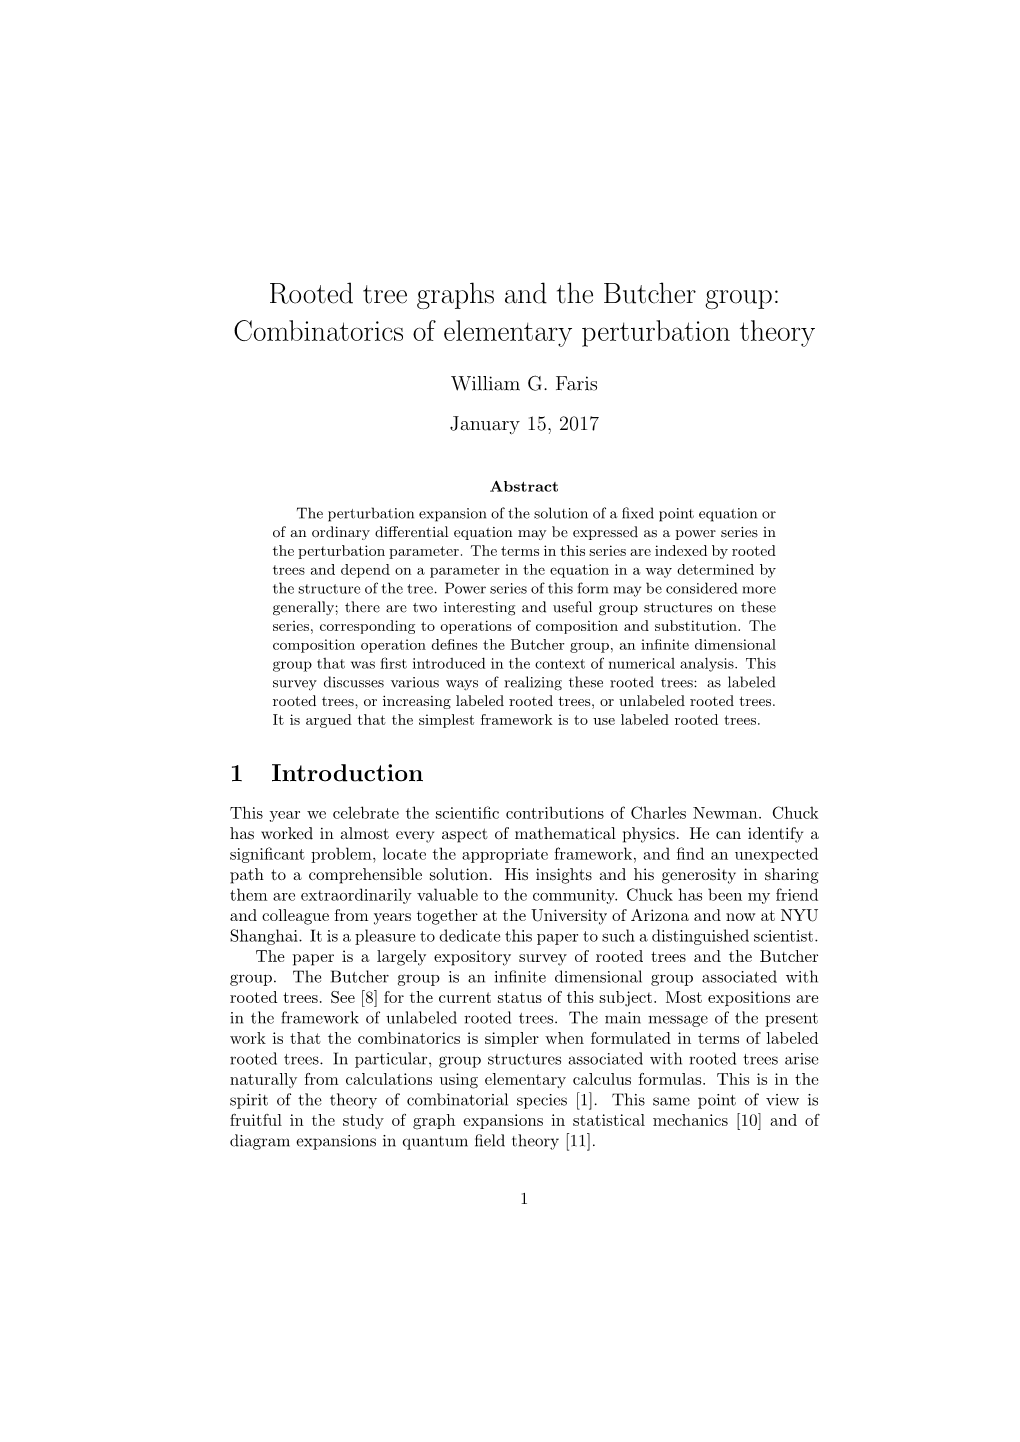 Rooted Tree Graphs and the Butcher Group: Combinatorics of Elementary Perturbation Theory